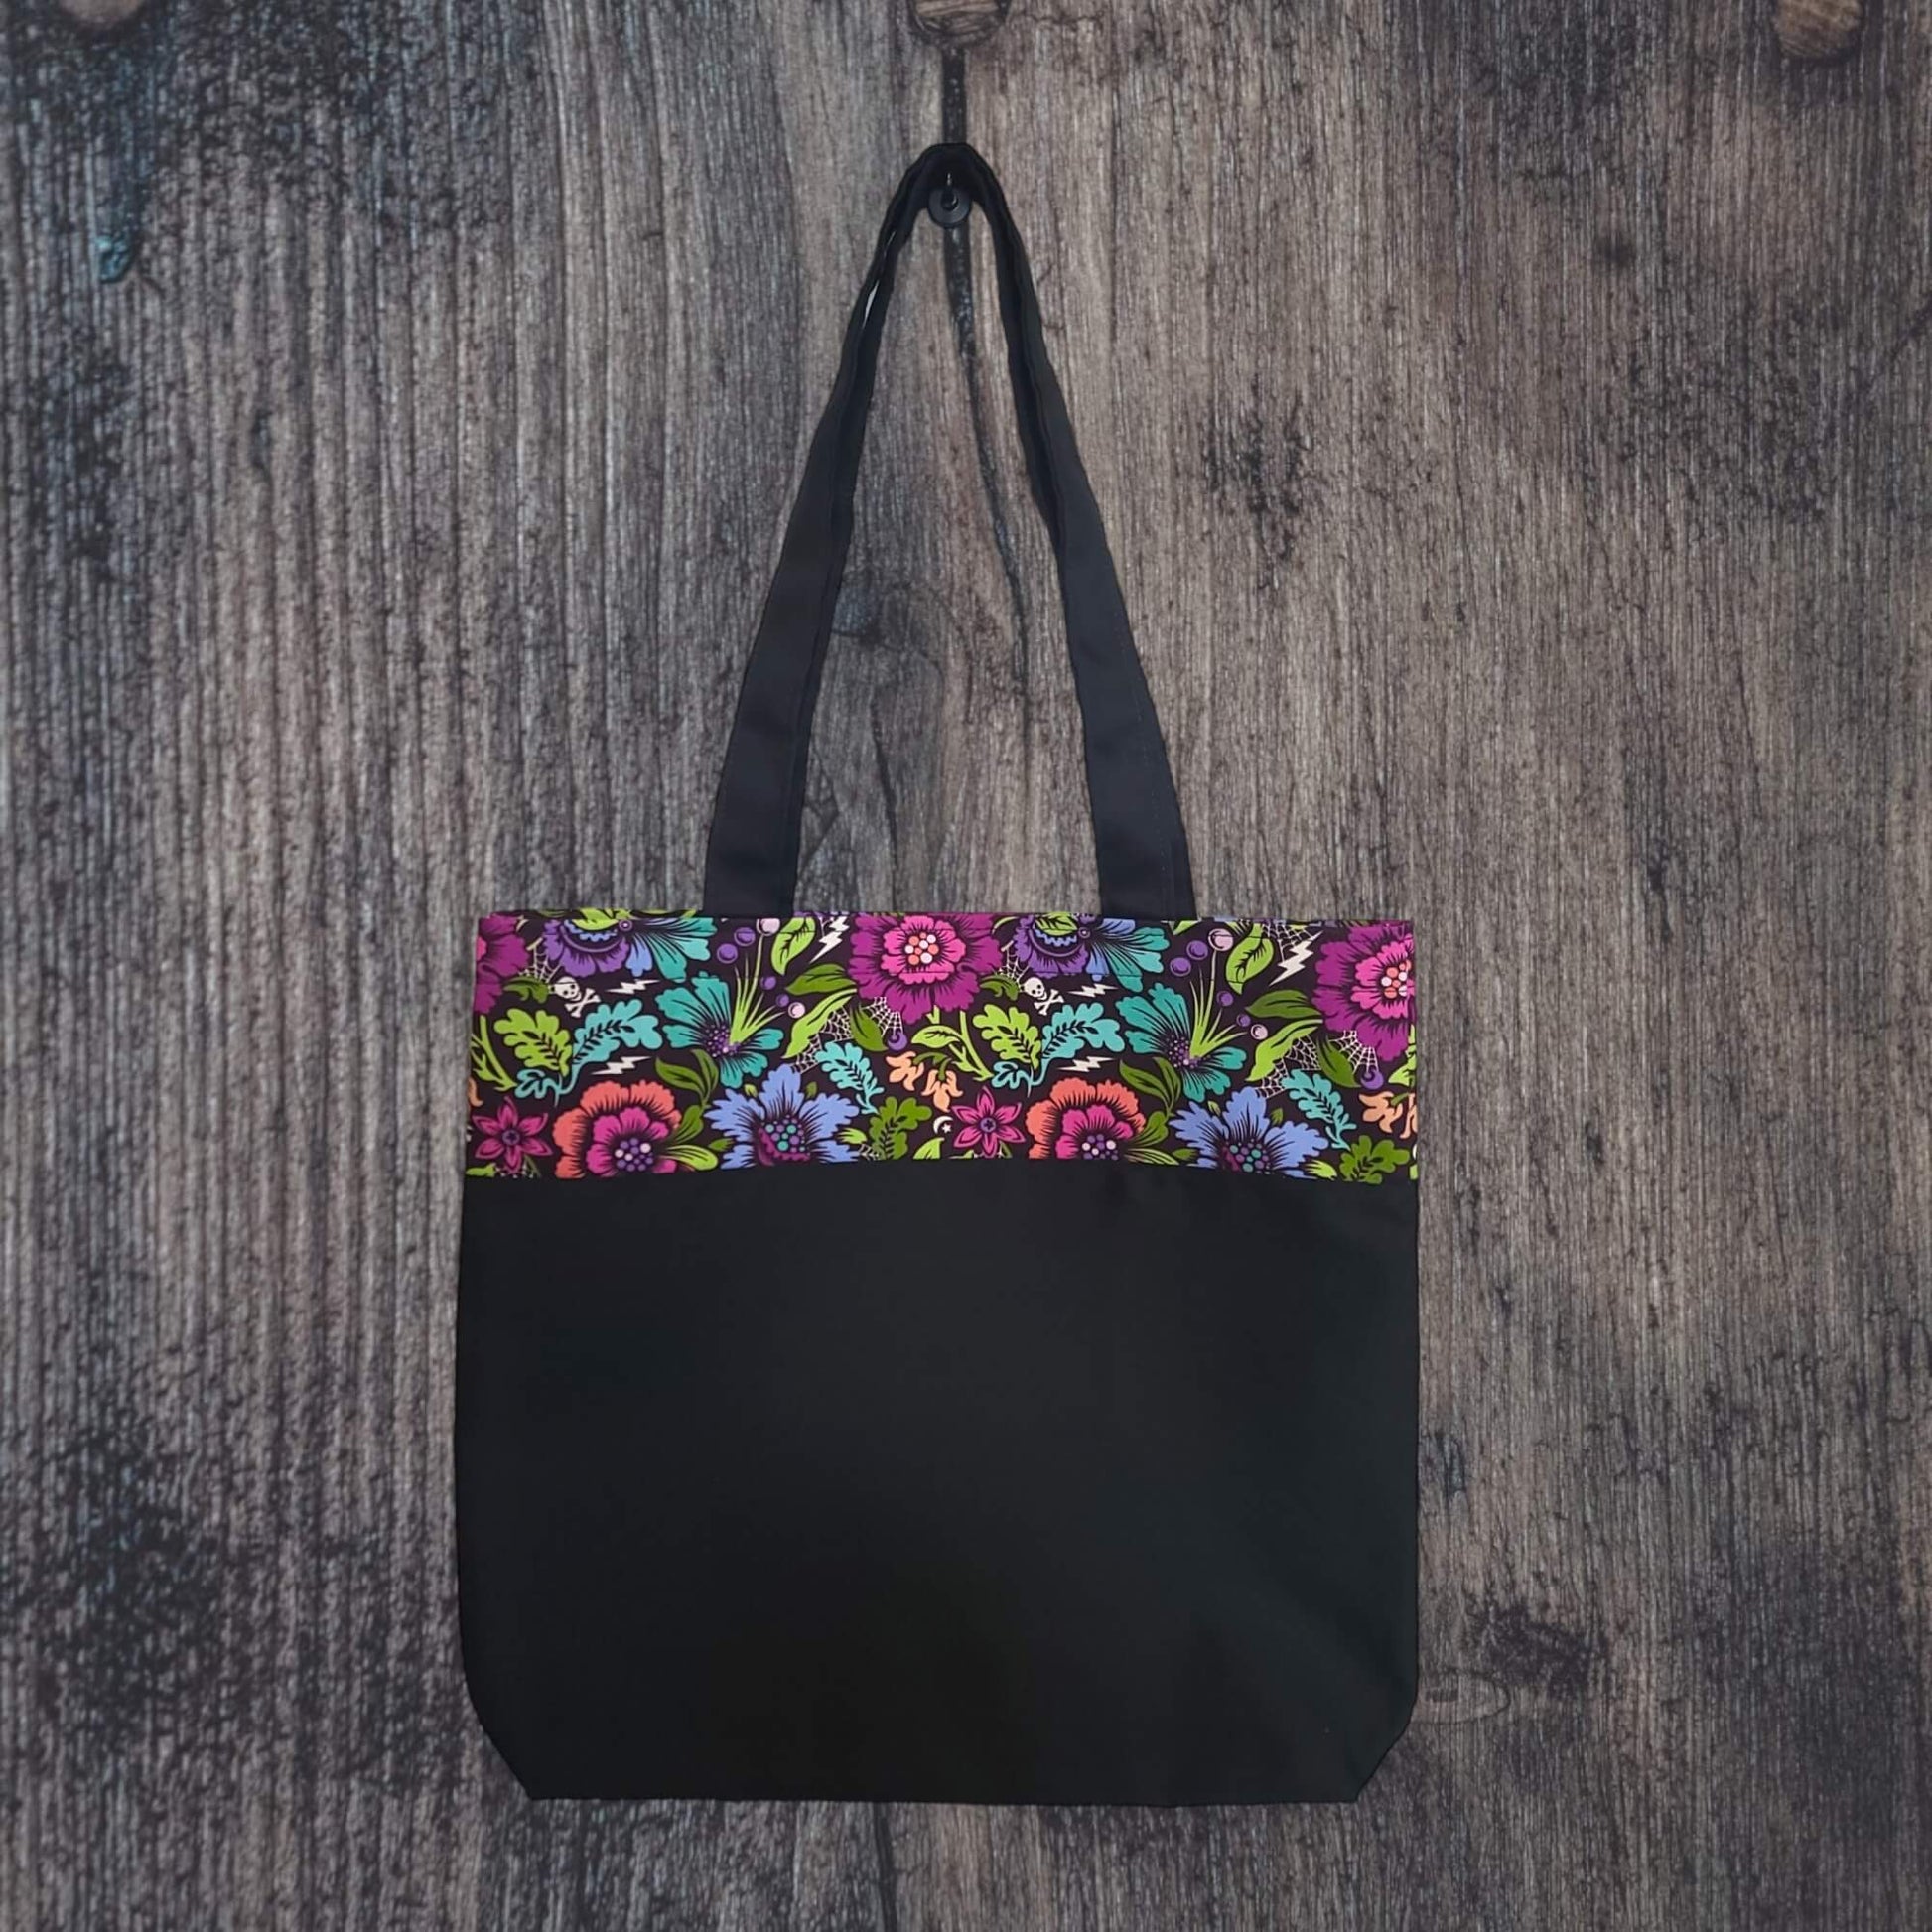 our accent tote bag featuring our Nightshade pattern.